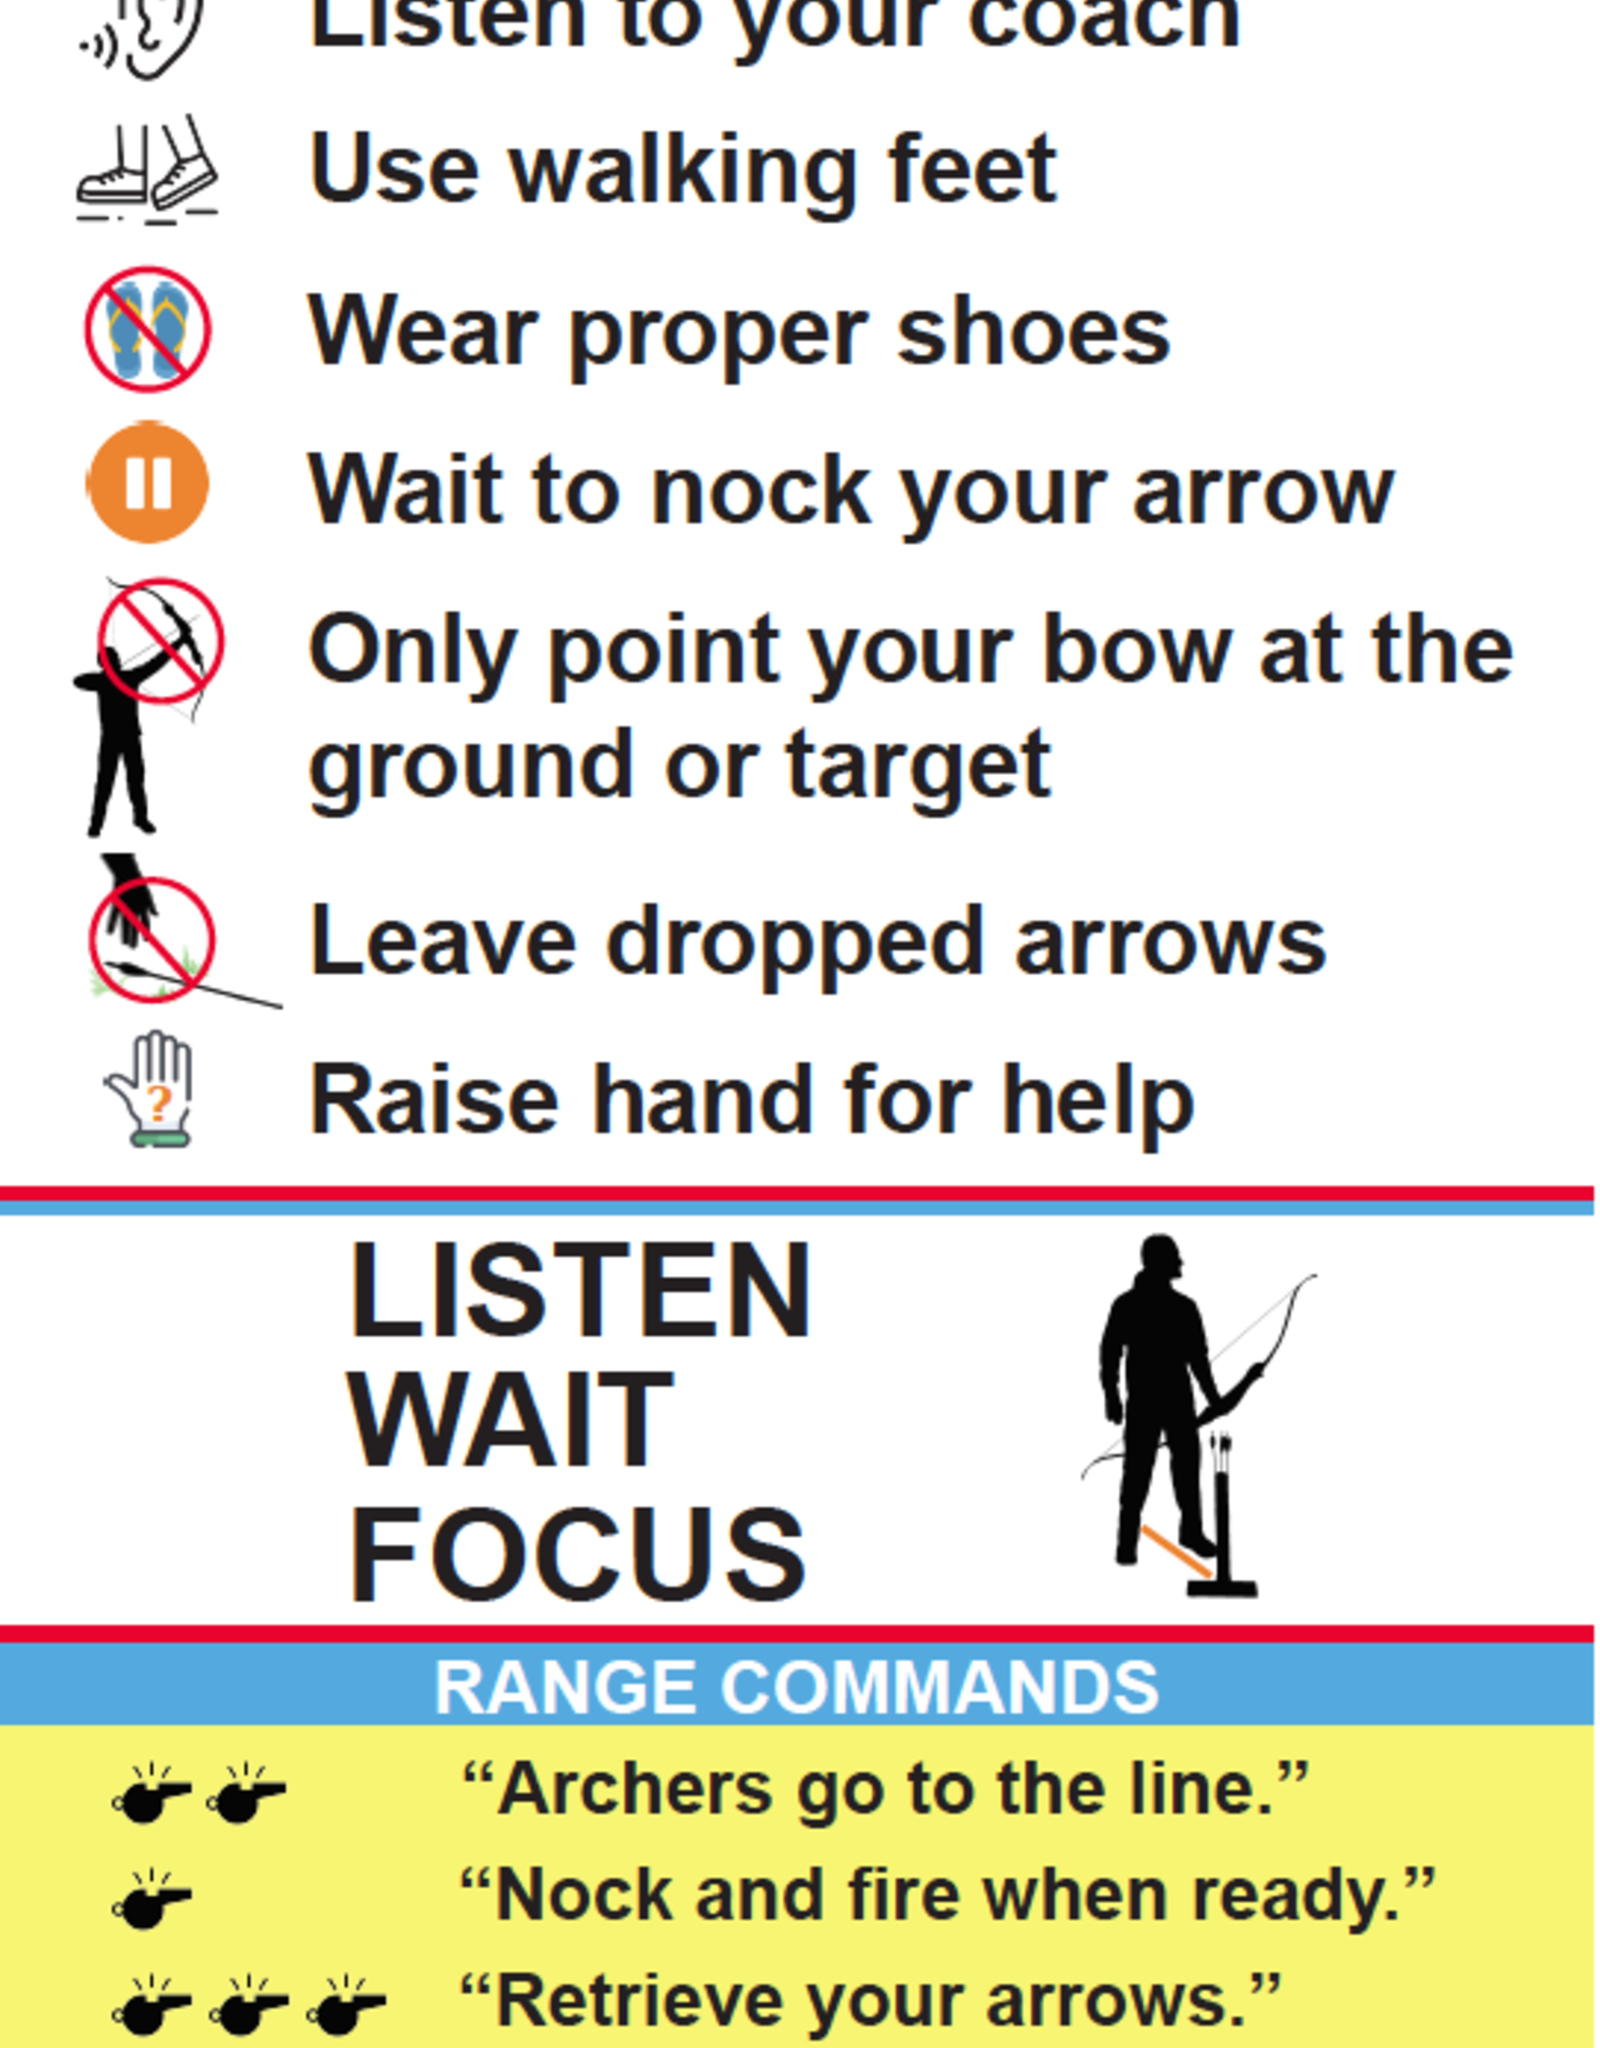 Early Reader Archery Range Rules Poster Sattva Center For Archery Training